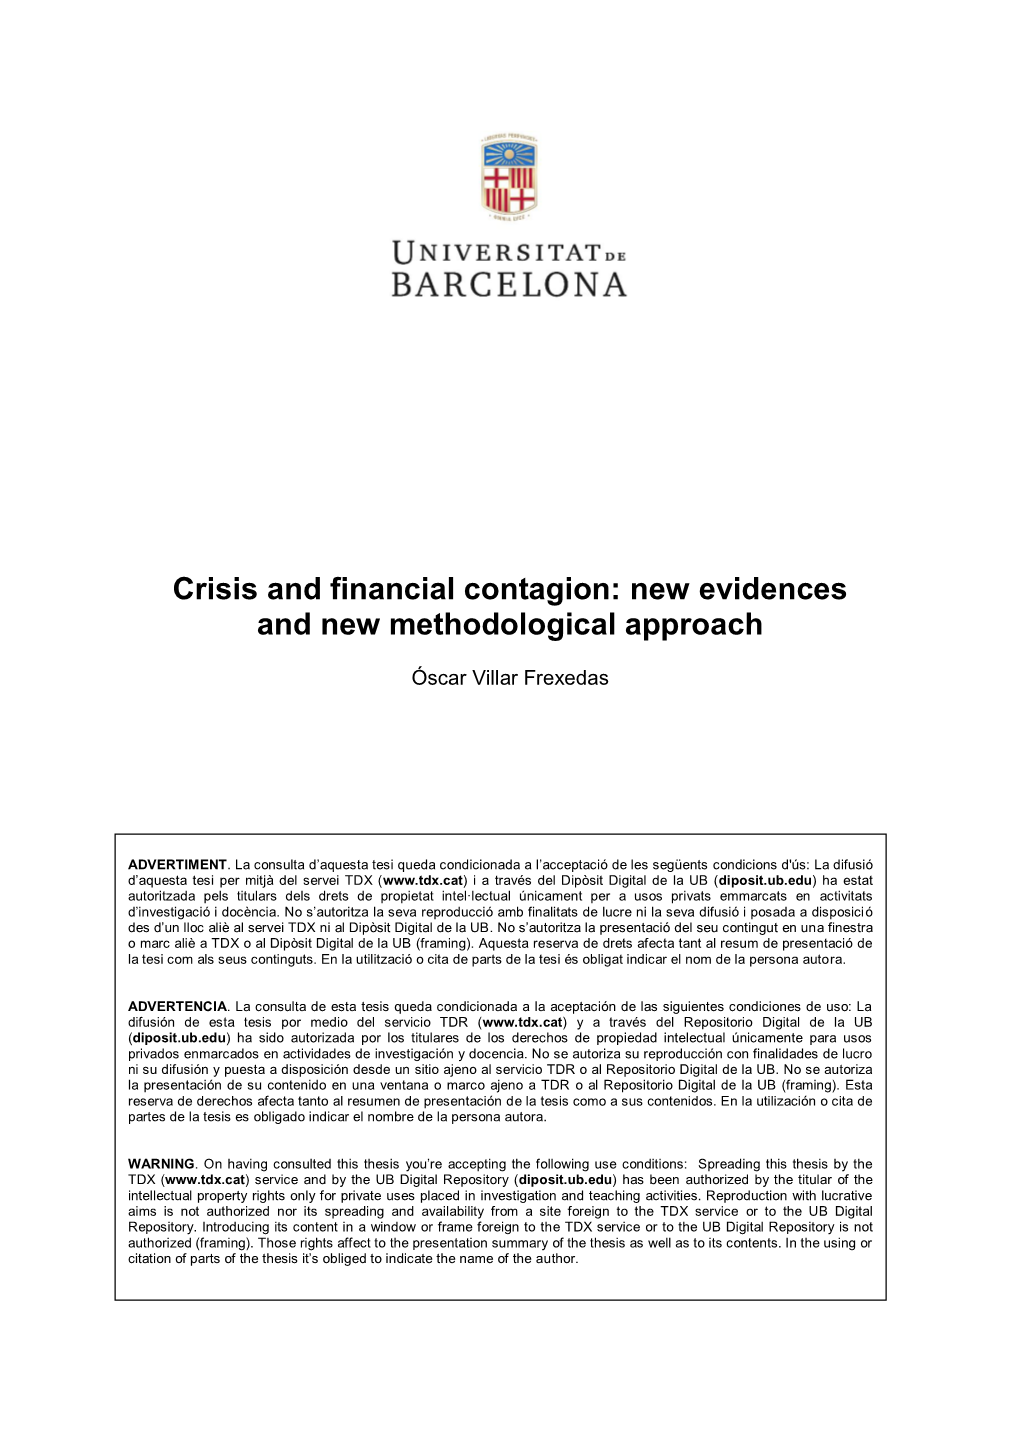 Crisis and Financial Contagion: New Evidences and New Methodological Approach